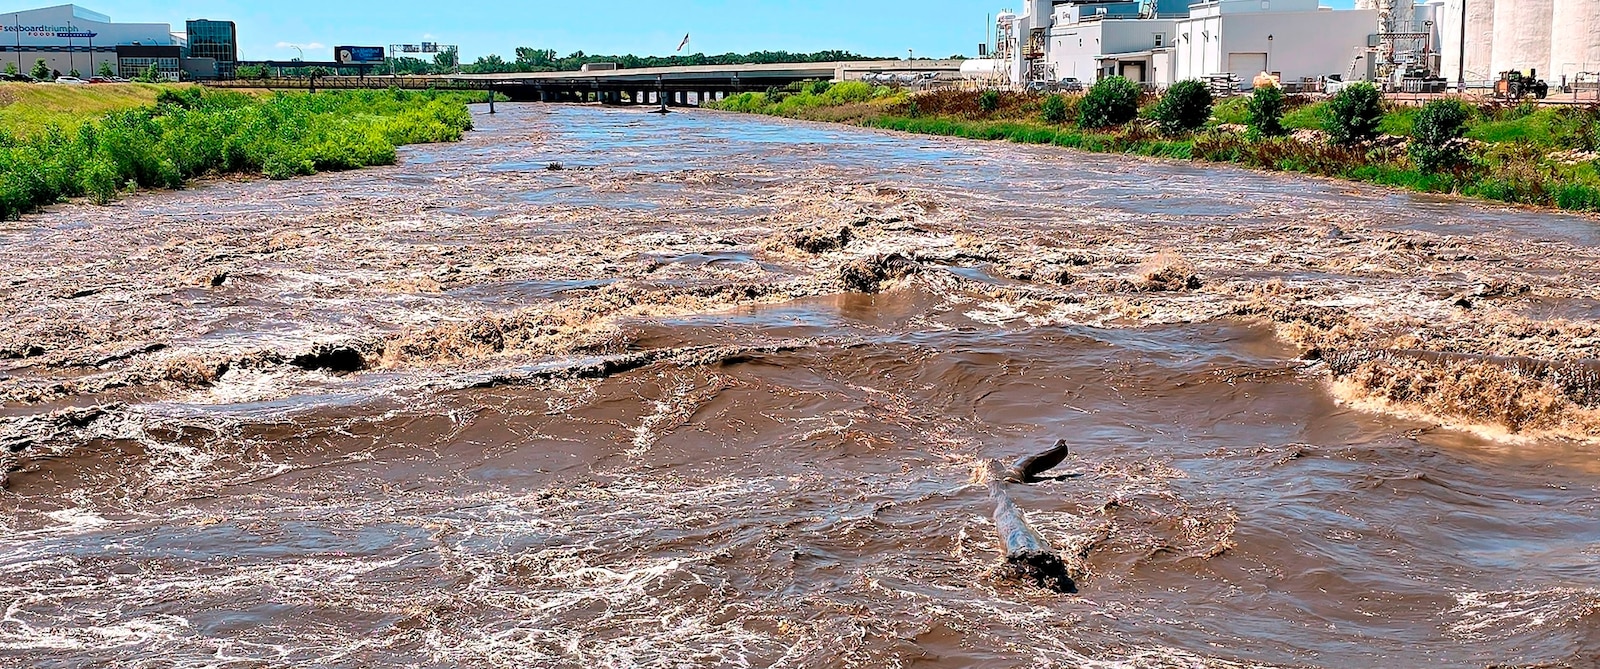 ‘Fecal soup’ could be lurking in Iowa floodwaters, health experts warn [Video]